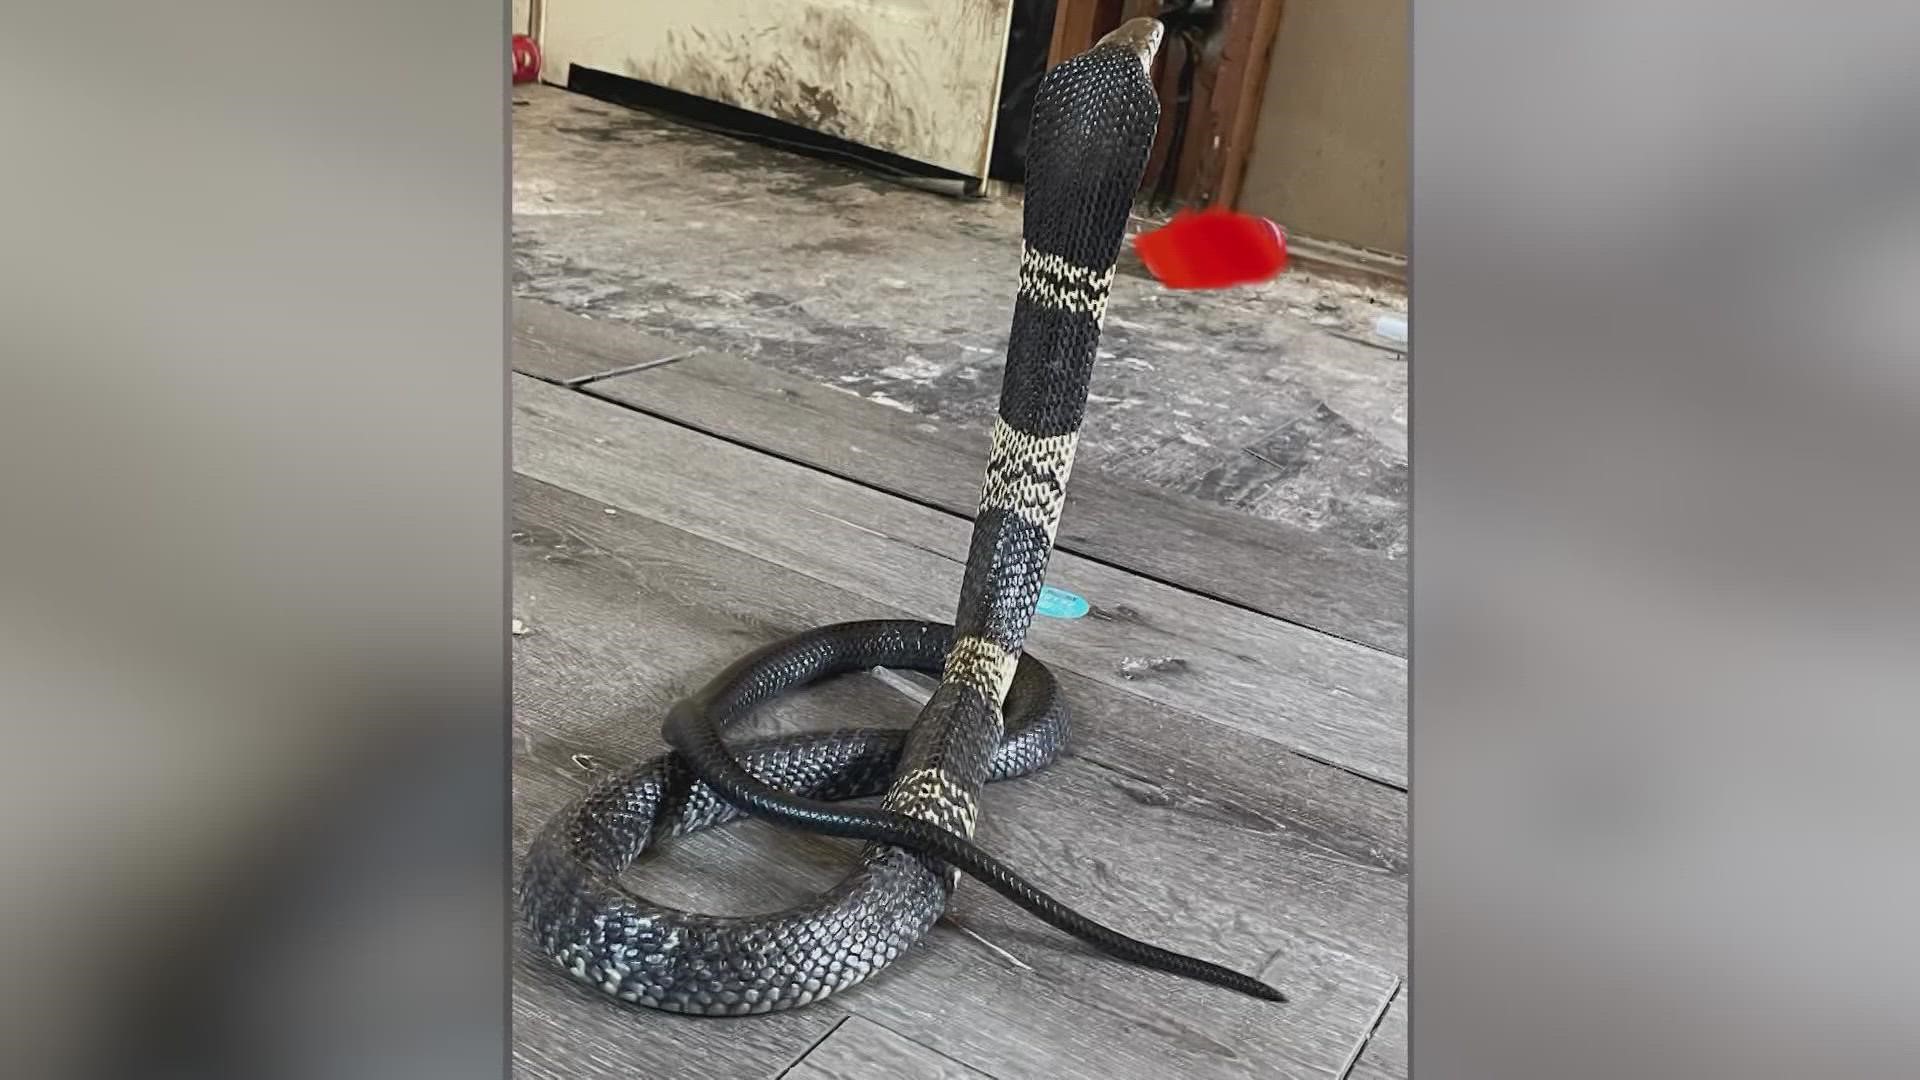 A resident noticed their West African Banded Cobra went missing from its enclosure, officials said. They're now warning residents to be on alert, as they search.